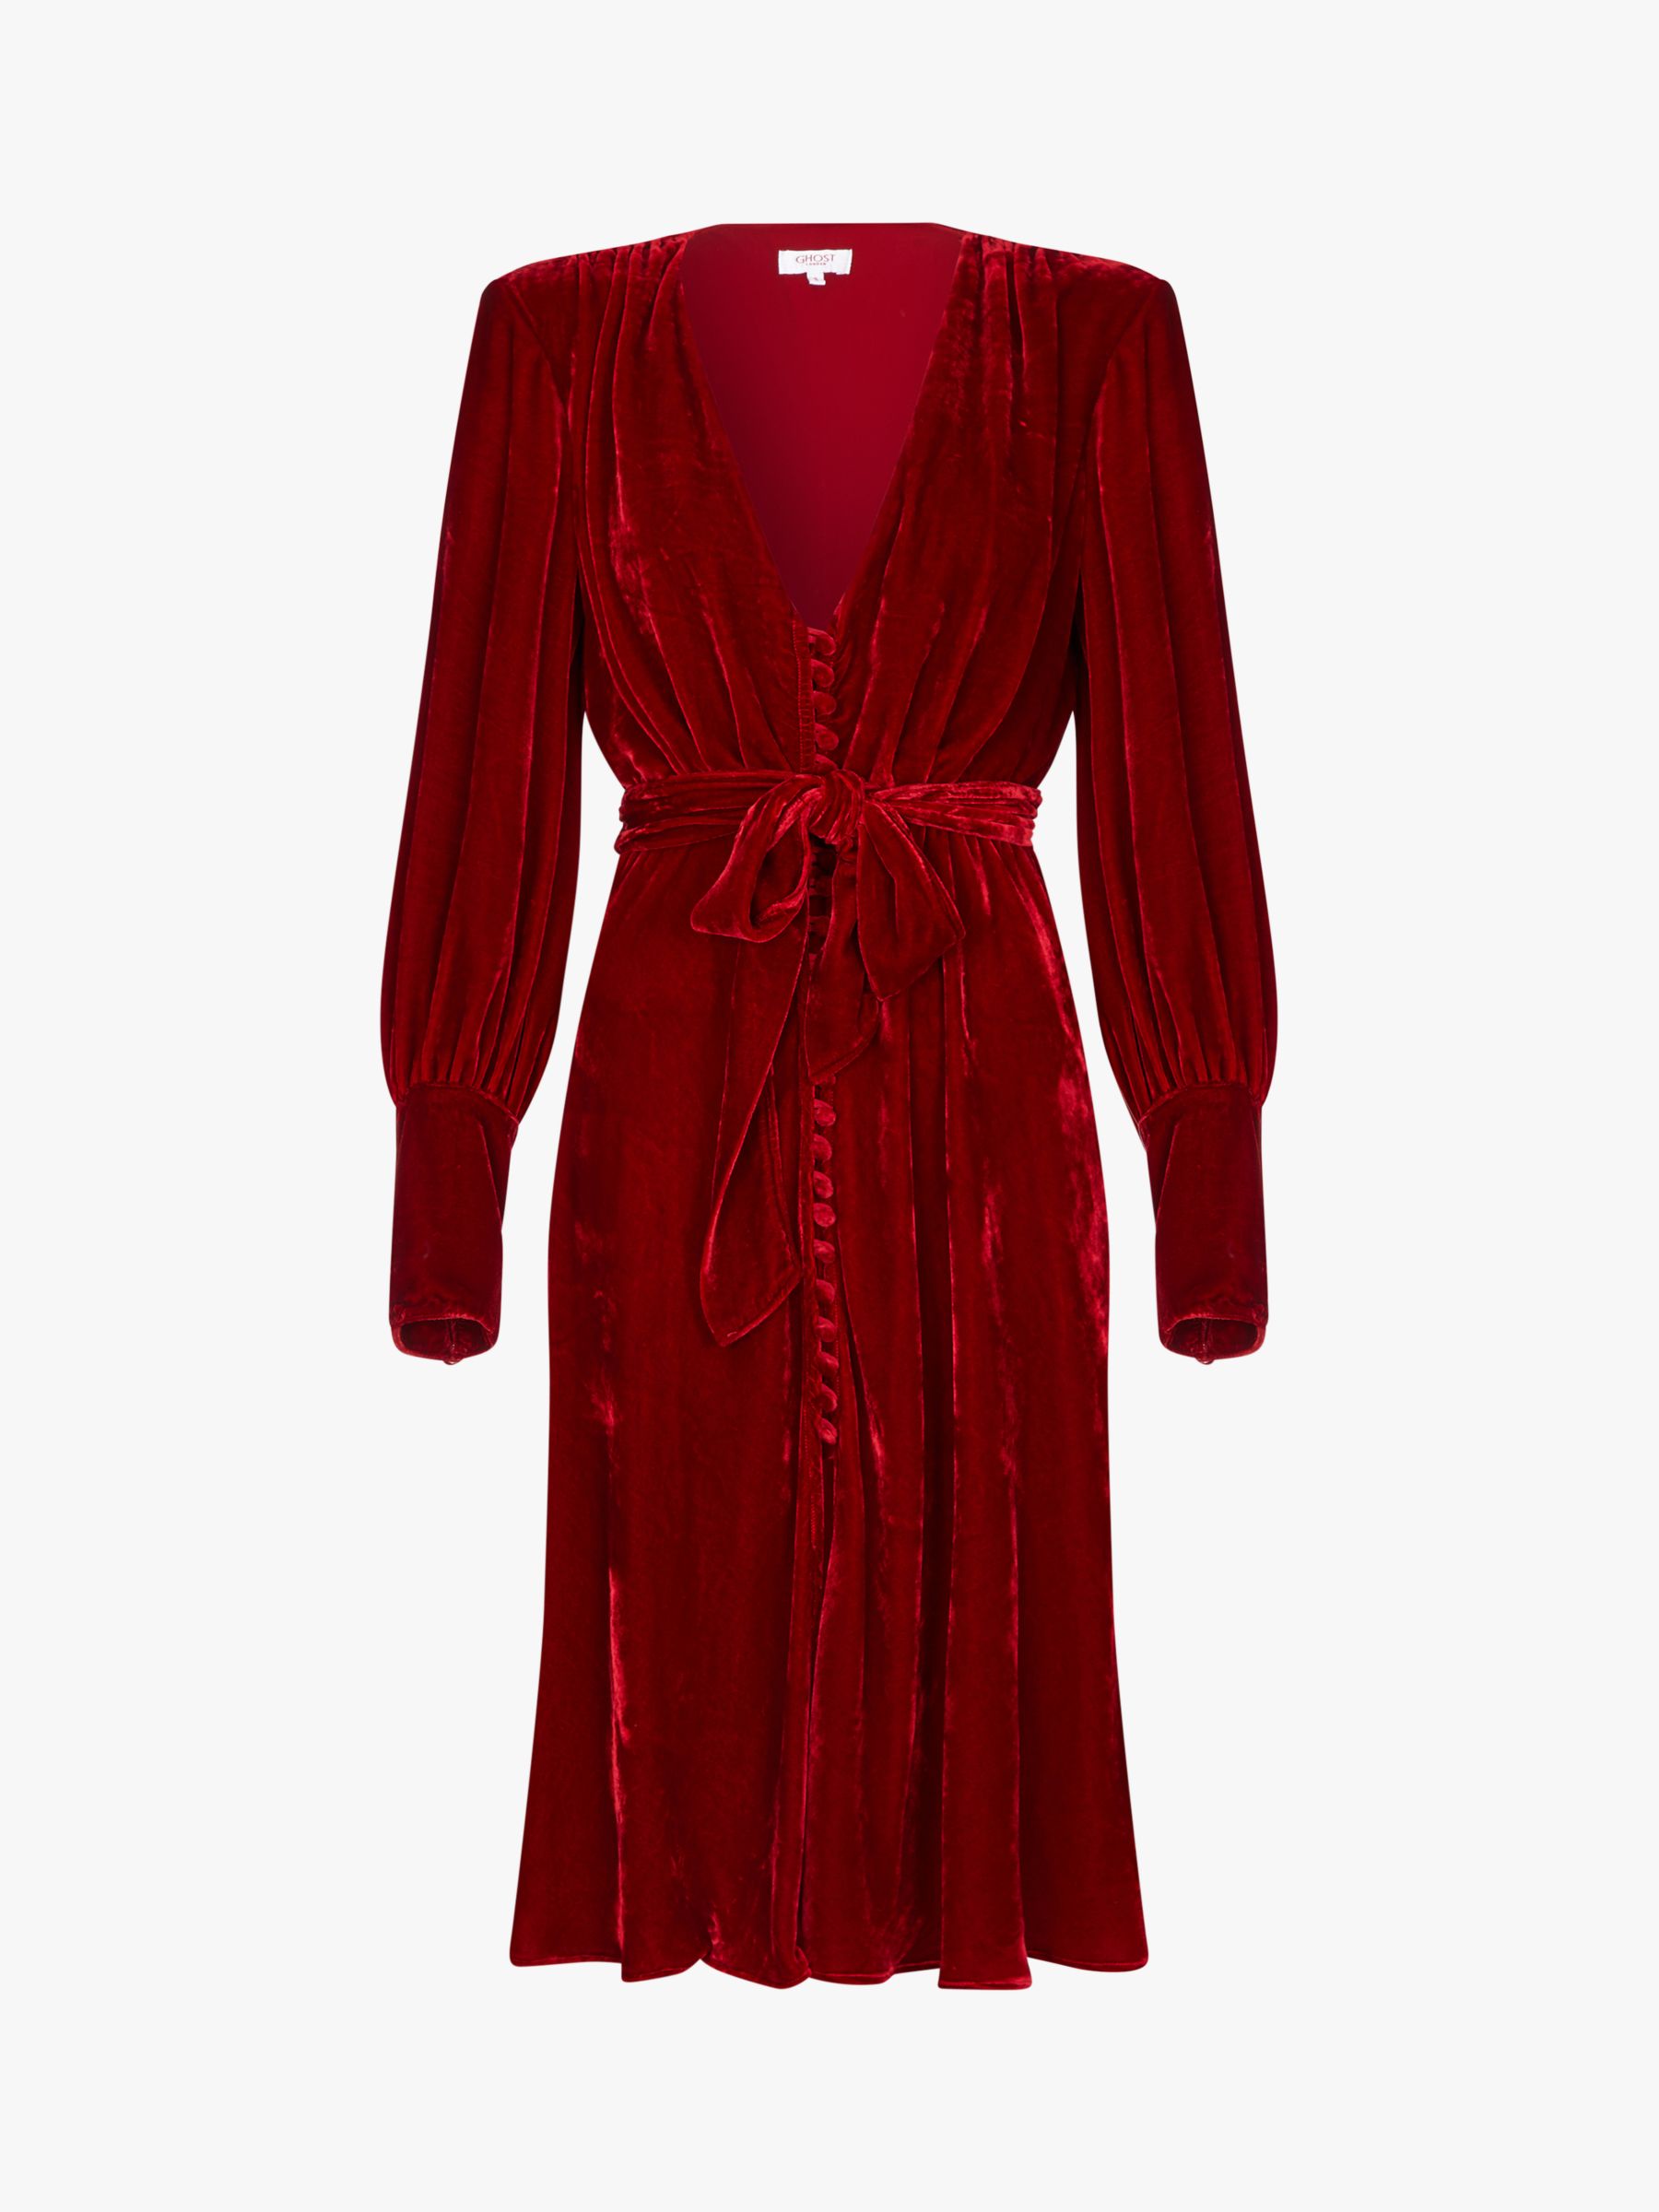 ghost dress red